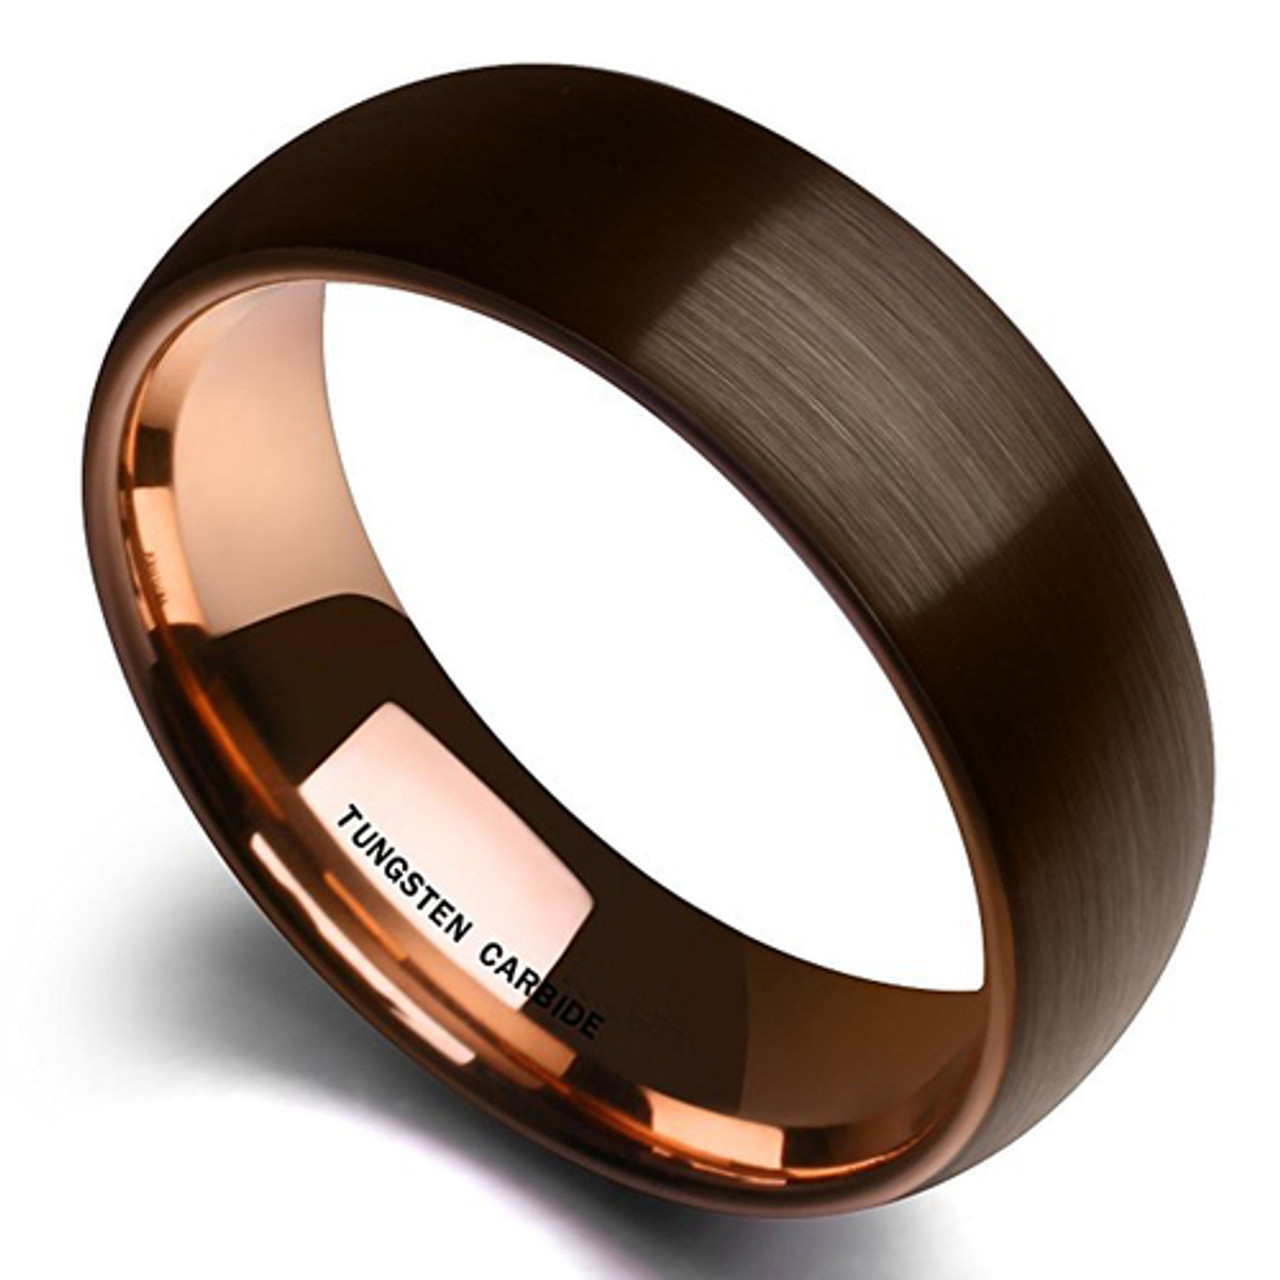 (8mm) Unisex or Men's Tungsten Carbide Wedding Ring Band. Brown Band with Matte Finish Top with Inside Rose Gold. Comfort Fit, Domed Top Ring.